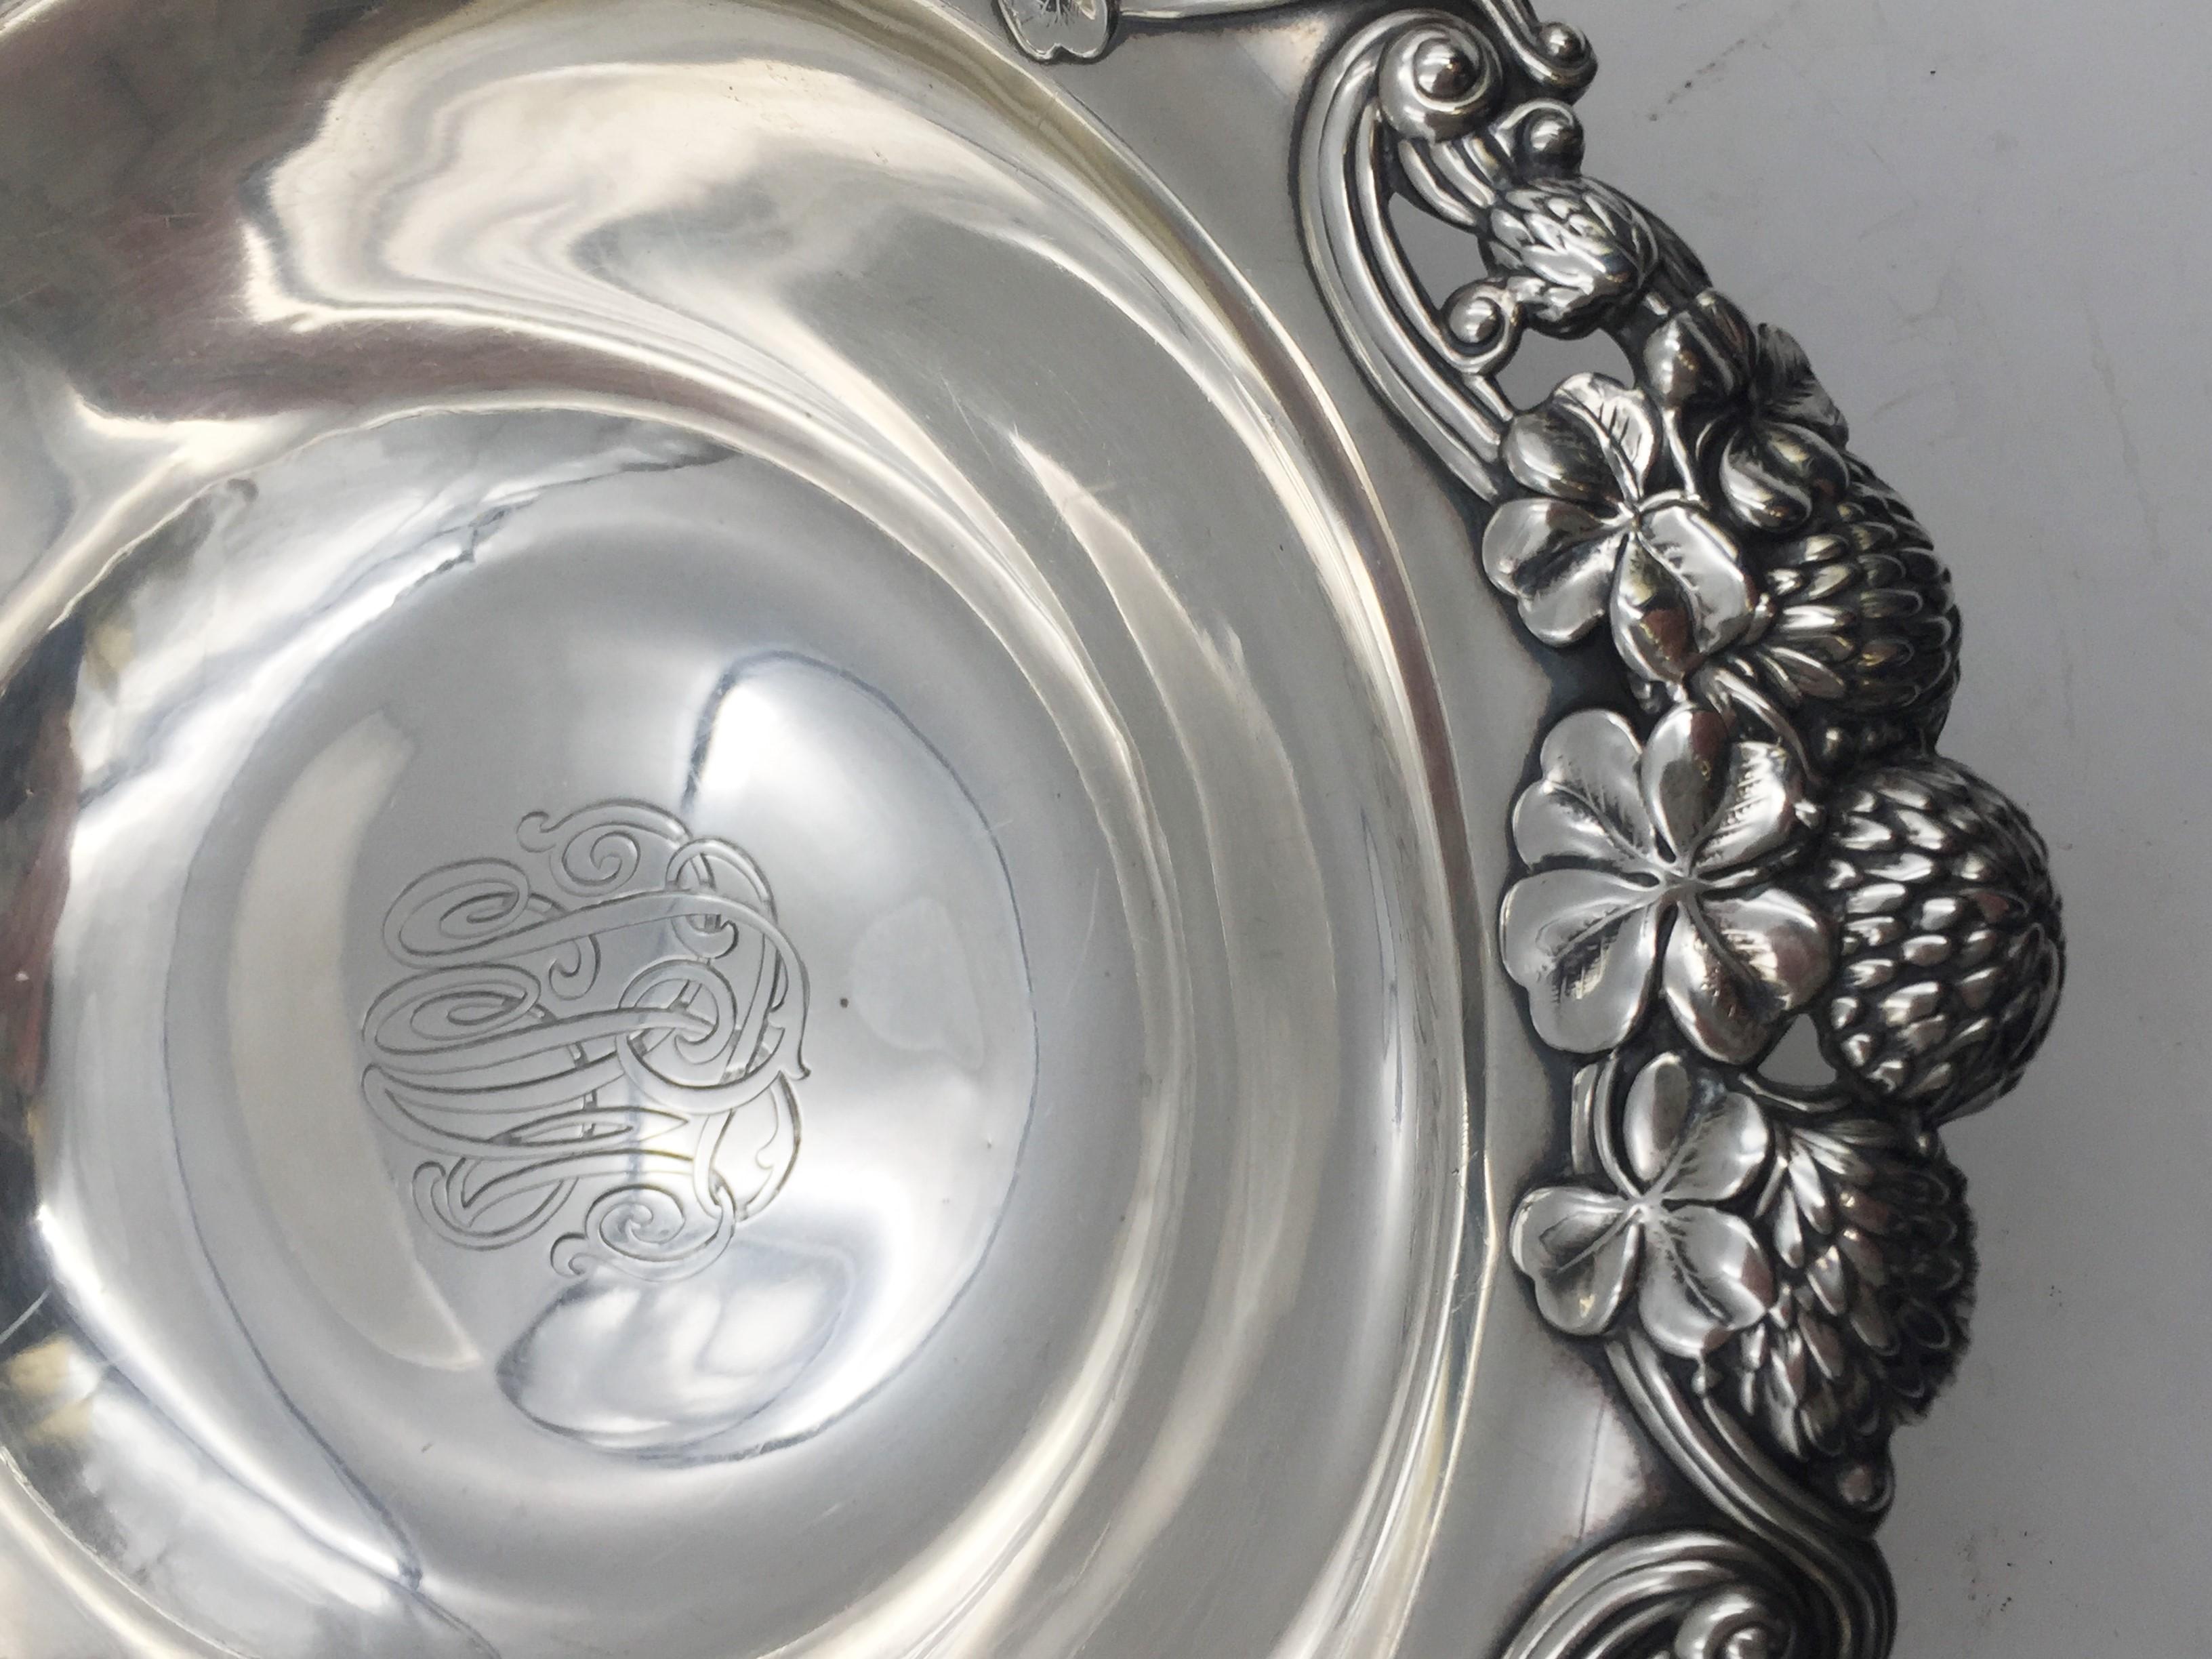 Appliqué Tiffany & Co. 1898 Sterling Silver Clover Berry Bowl in Art Nouveau Style